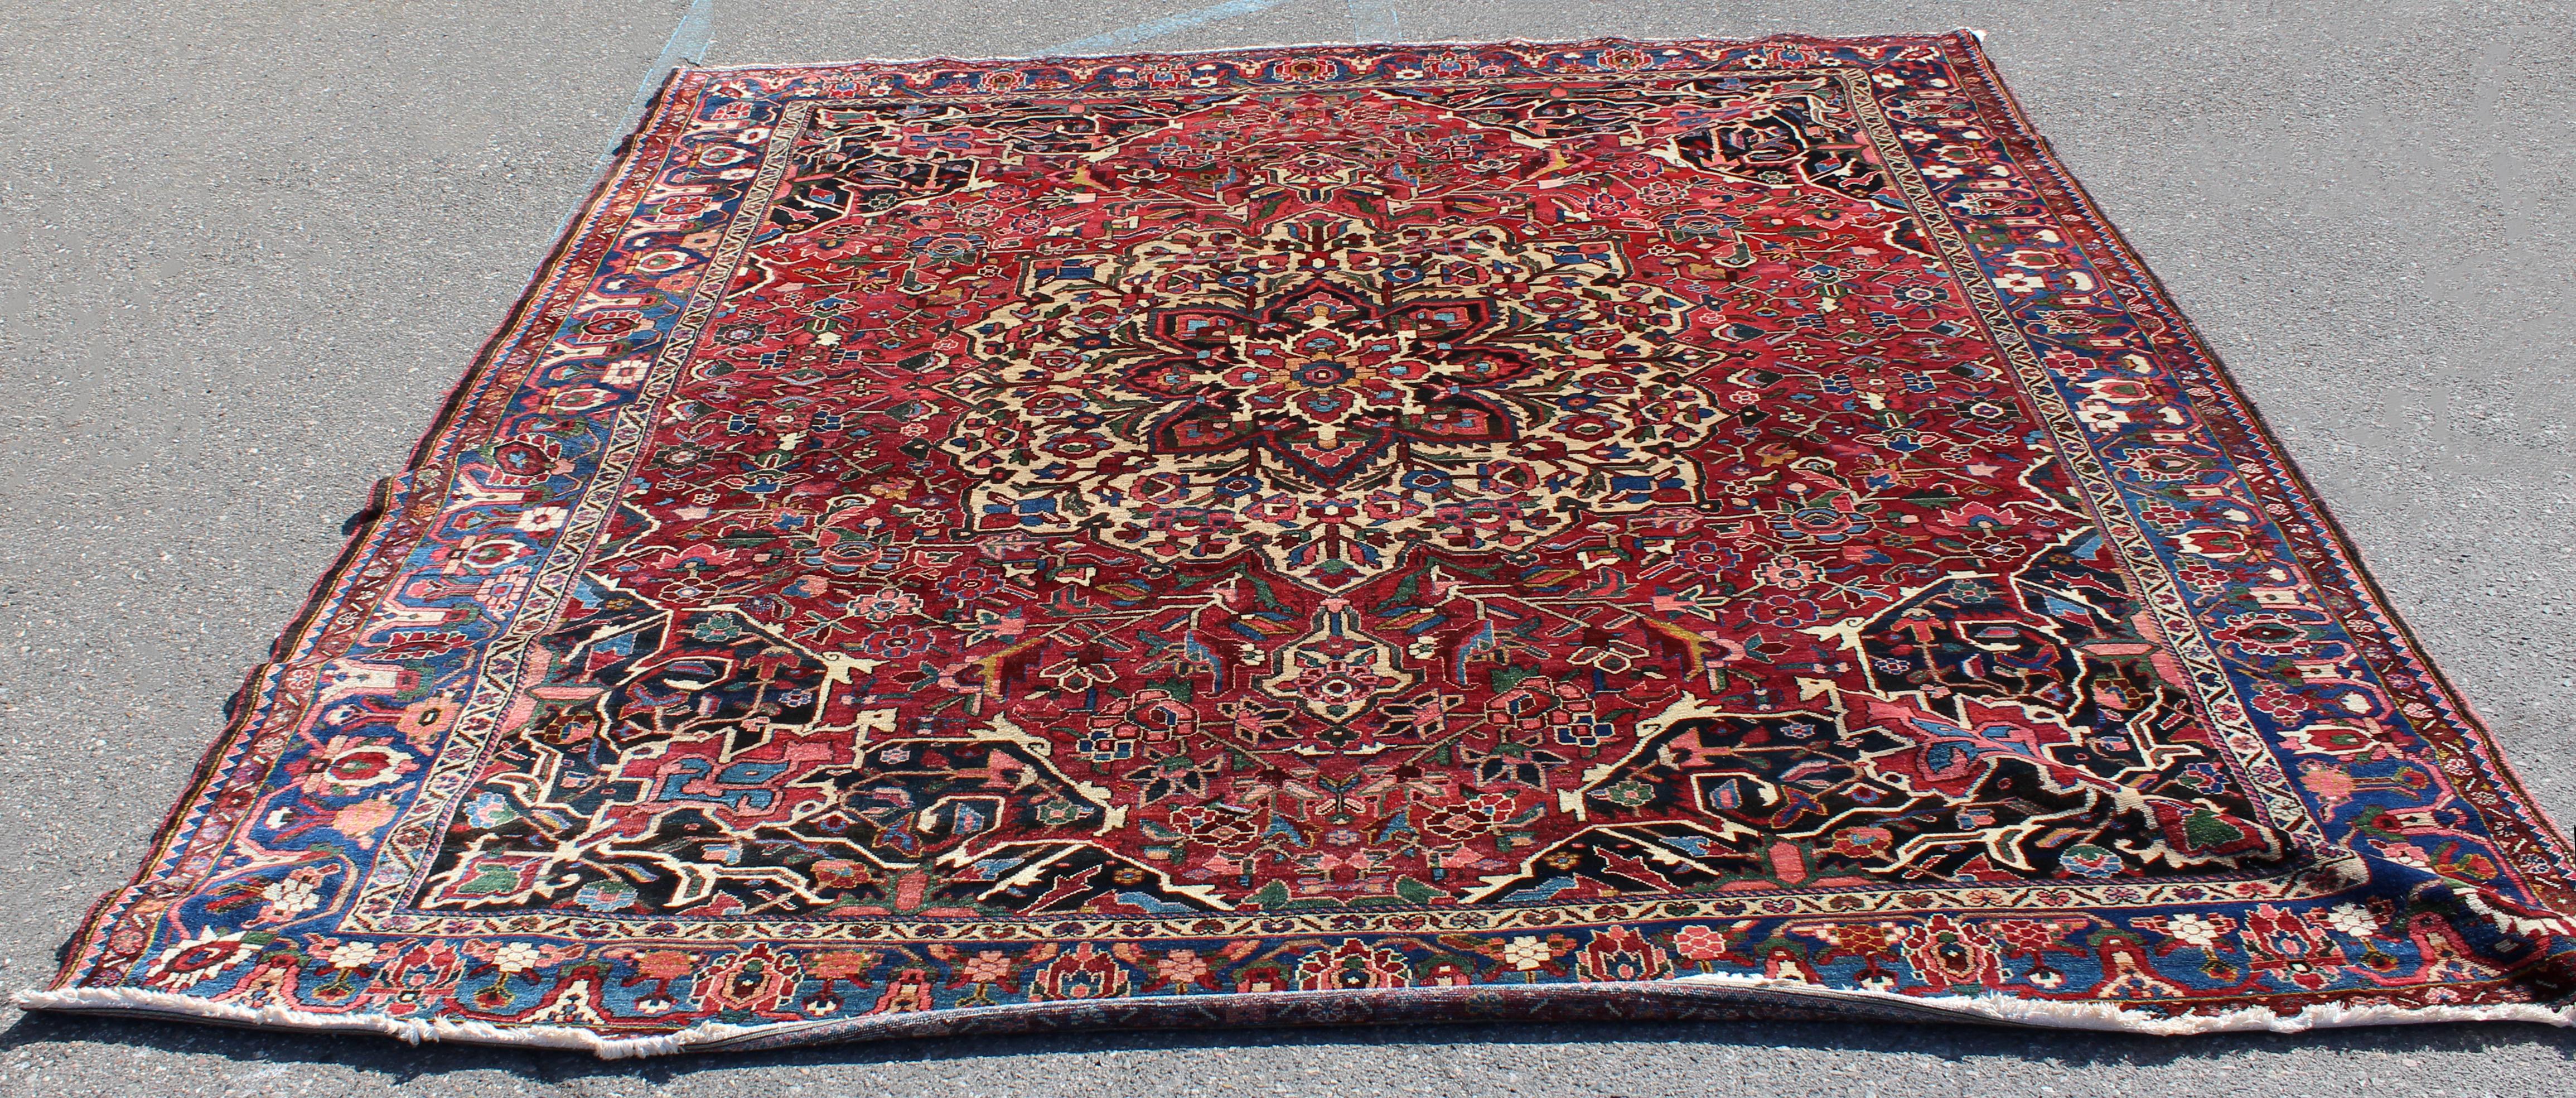 Traditional Bakhtiari Wool Iranian Persian Area Rug Carpet Rectangular Red In Good Condition For Sale In Keego Harbor, MI